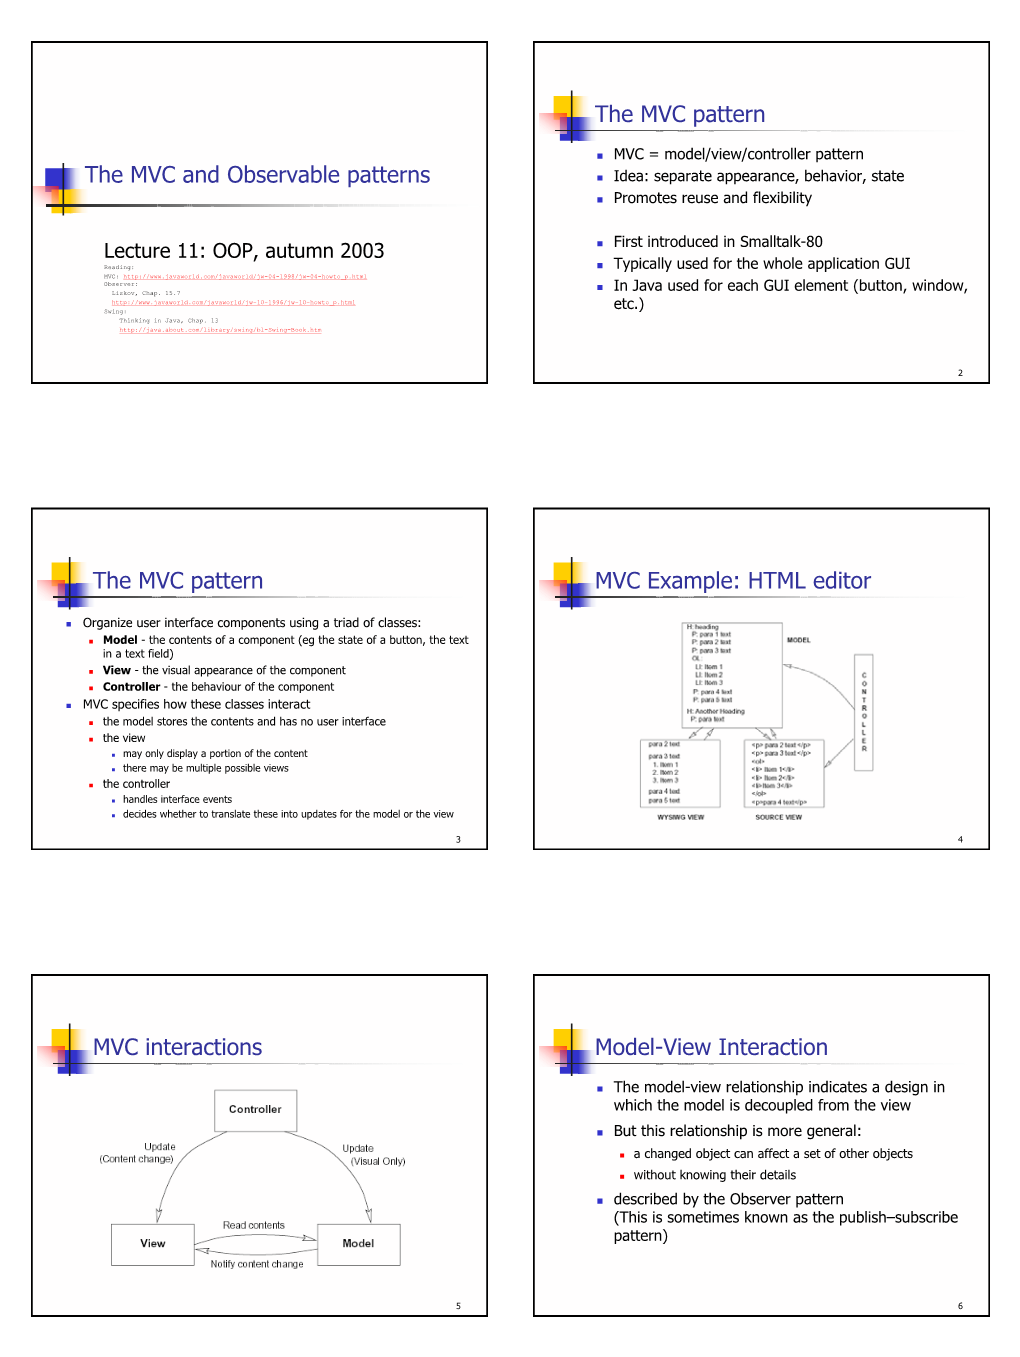 HTML Editor MVC Interactions Model-View Interaction